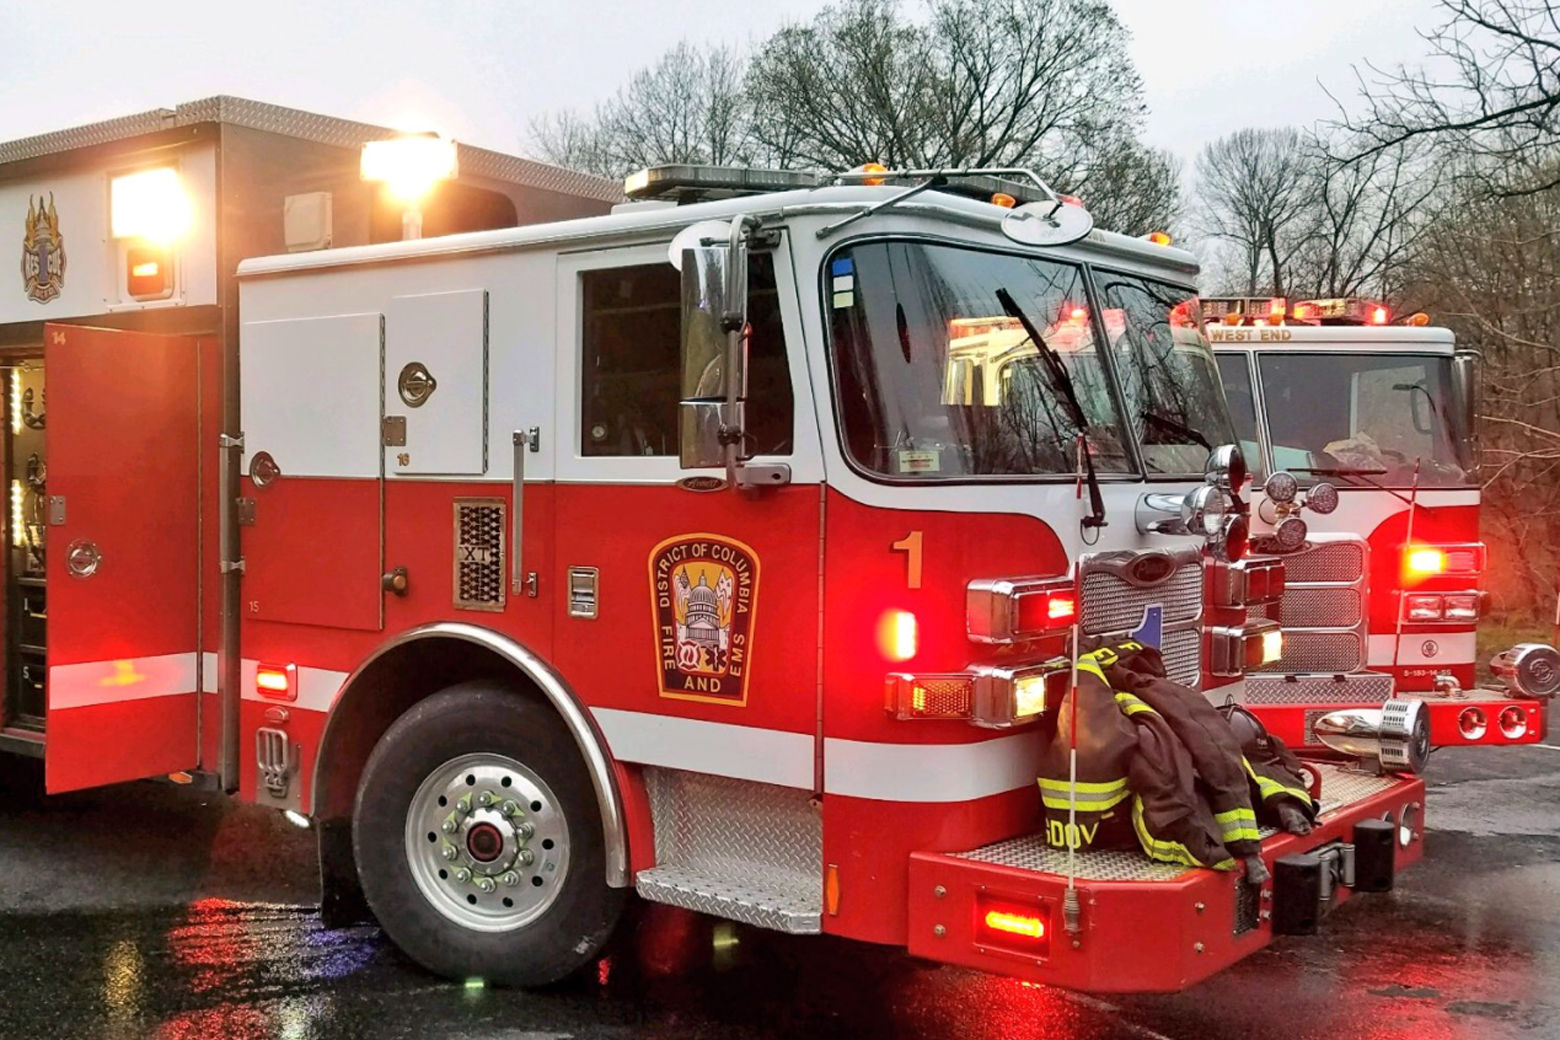 A D.C. Fire truck is seen here on March 2018. (Courtesy D.C. Fire and EMS)